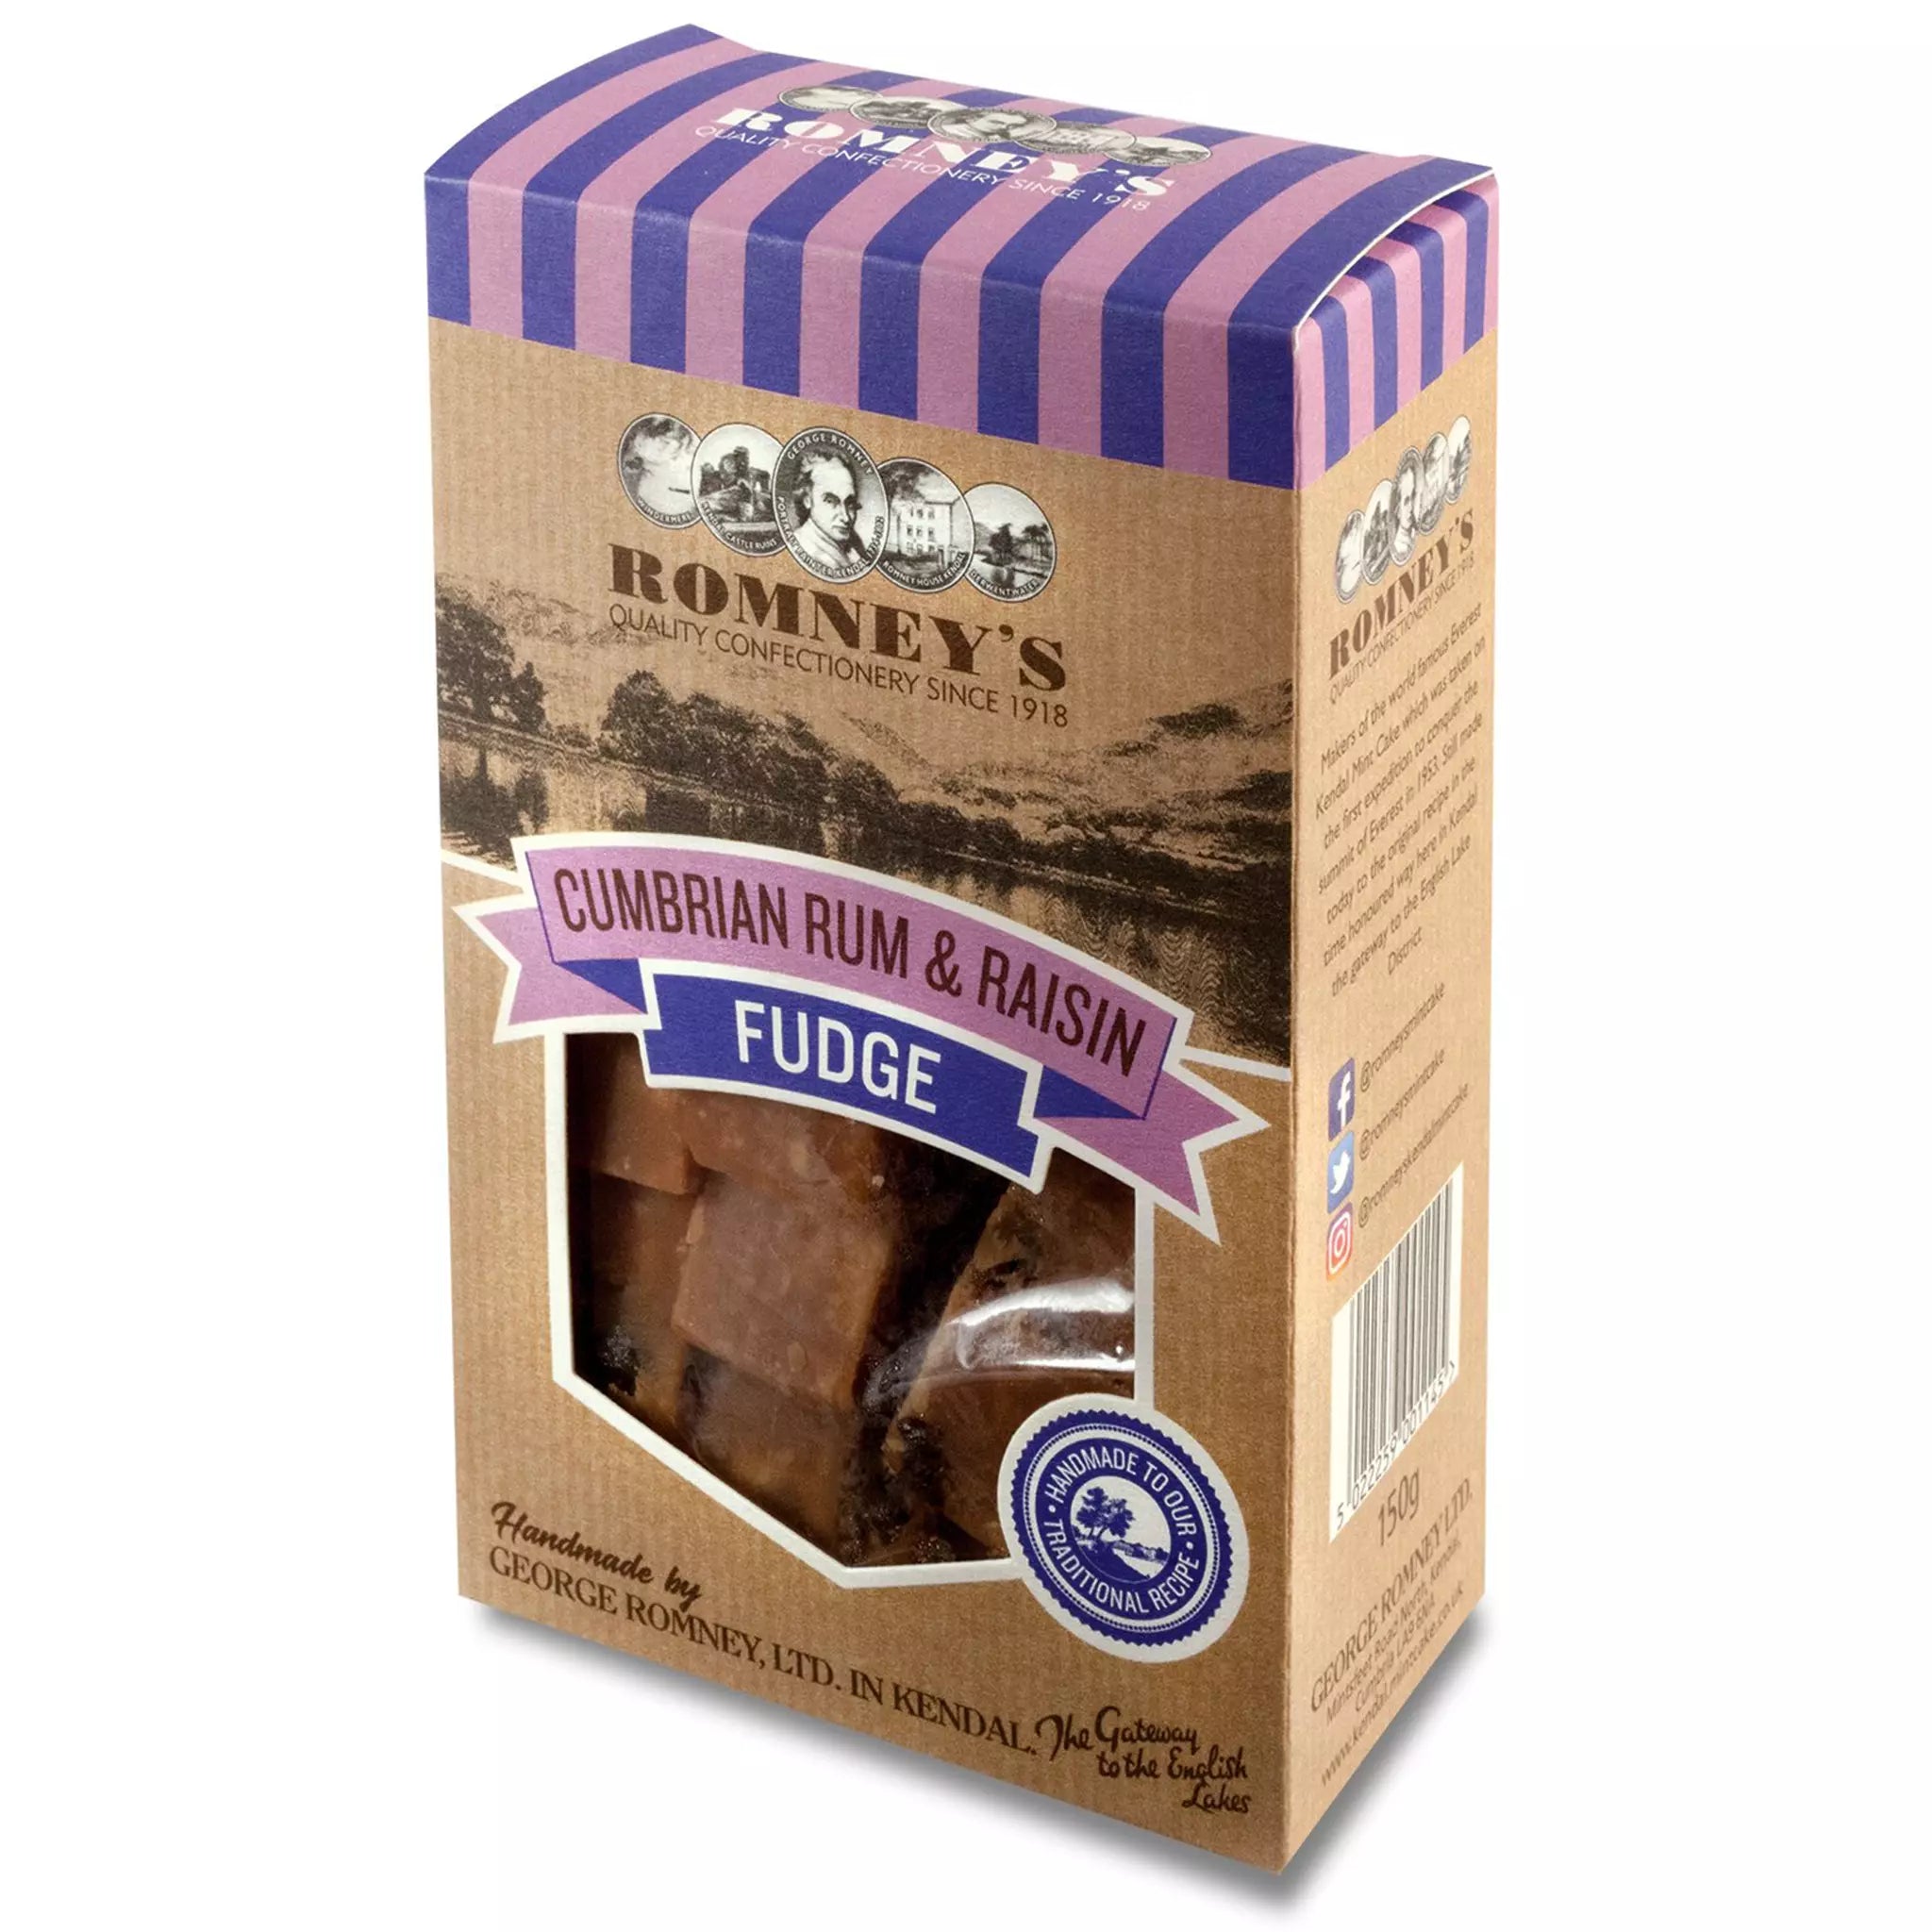 A rectangular cardboard box of fudge with a window cut out in the middle that shows fudge pieces in a wrapped bag. The top of the box has purple lines running down it. The box says 'Cumbrian Rum & Raisin Fudge'.